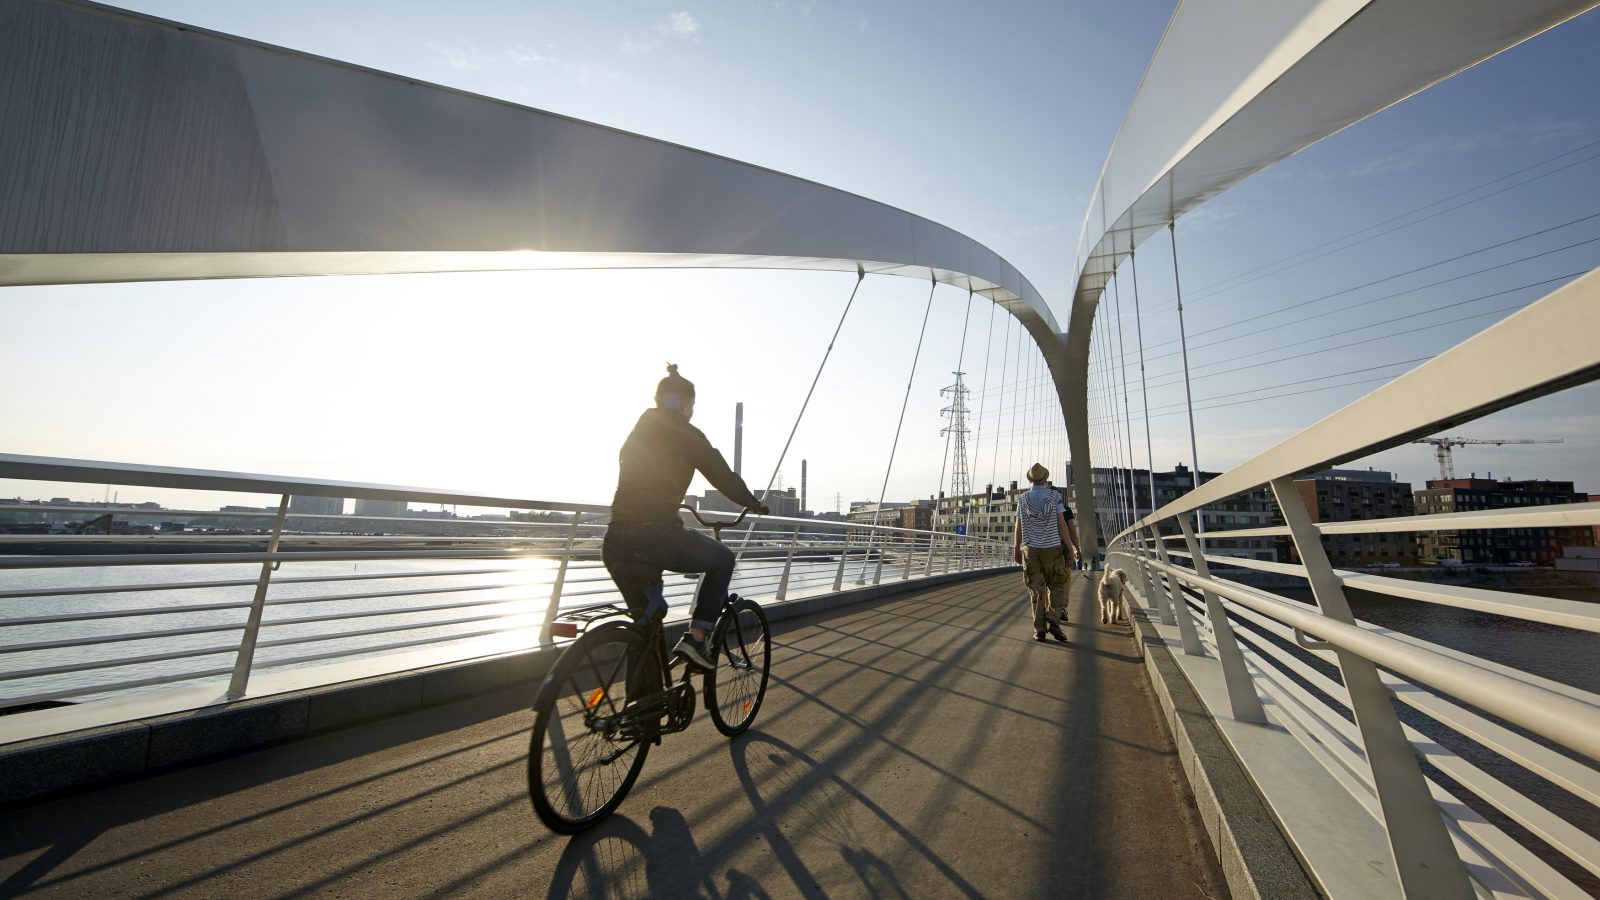 A woman biking whilst a couple are walking a dog across a bridge on a sunny day in Helsinki Finland.